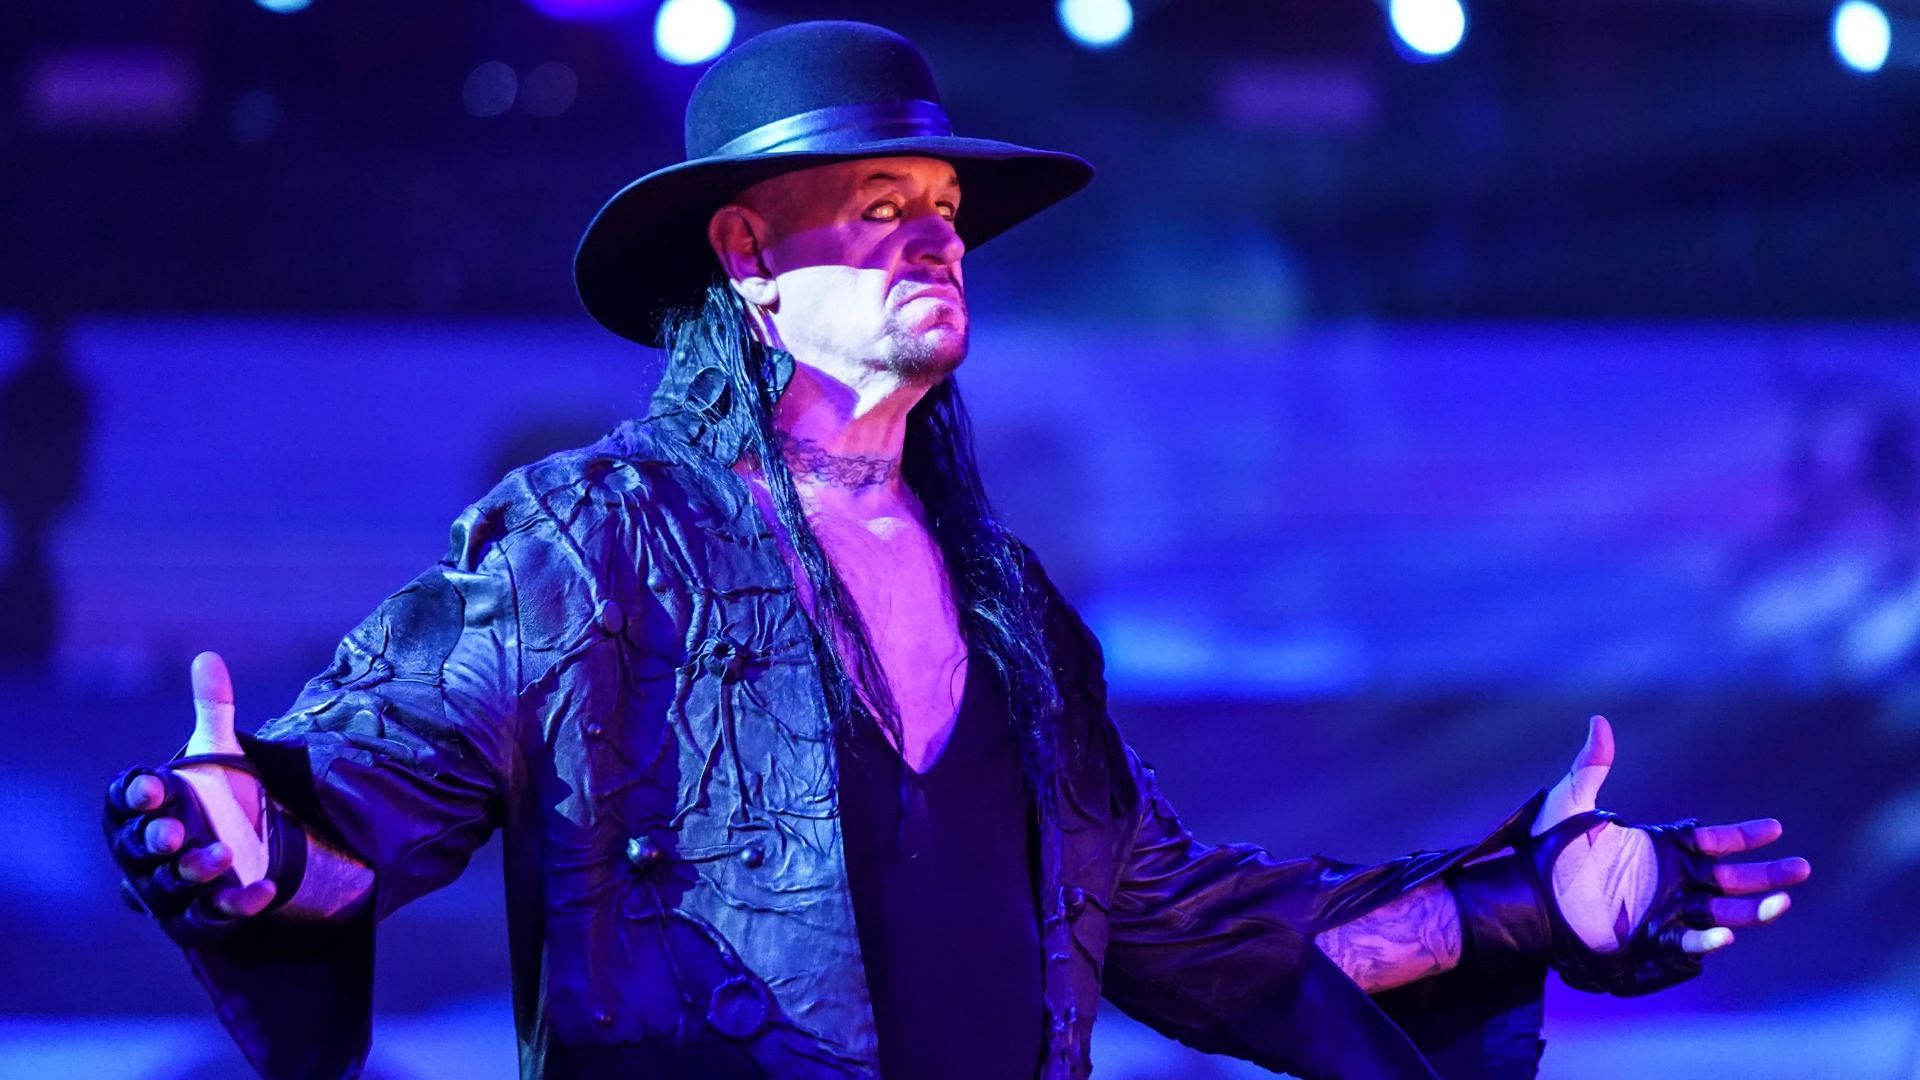 The Undertaker entered the WWE Hall of Fame in 2022.